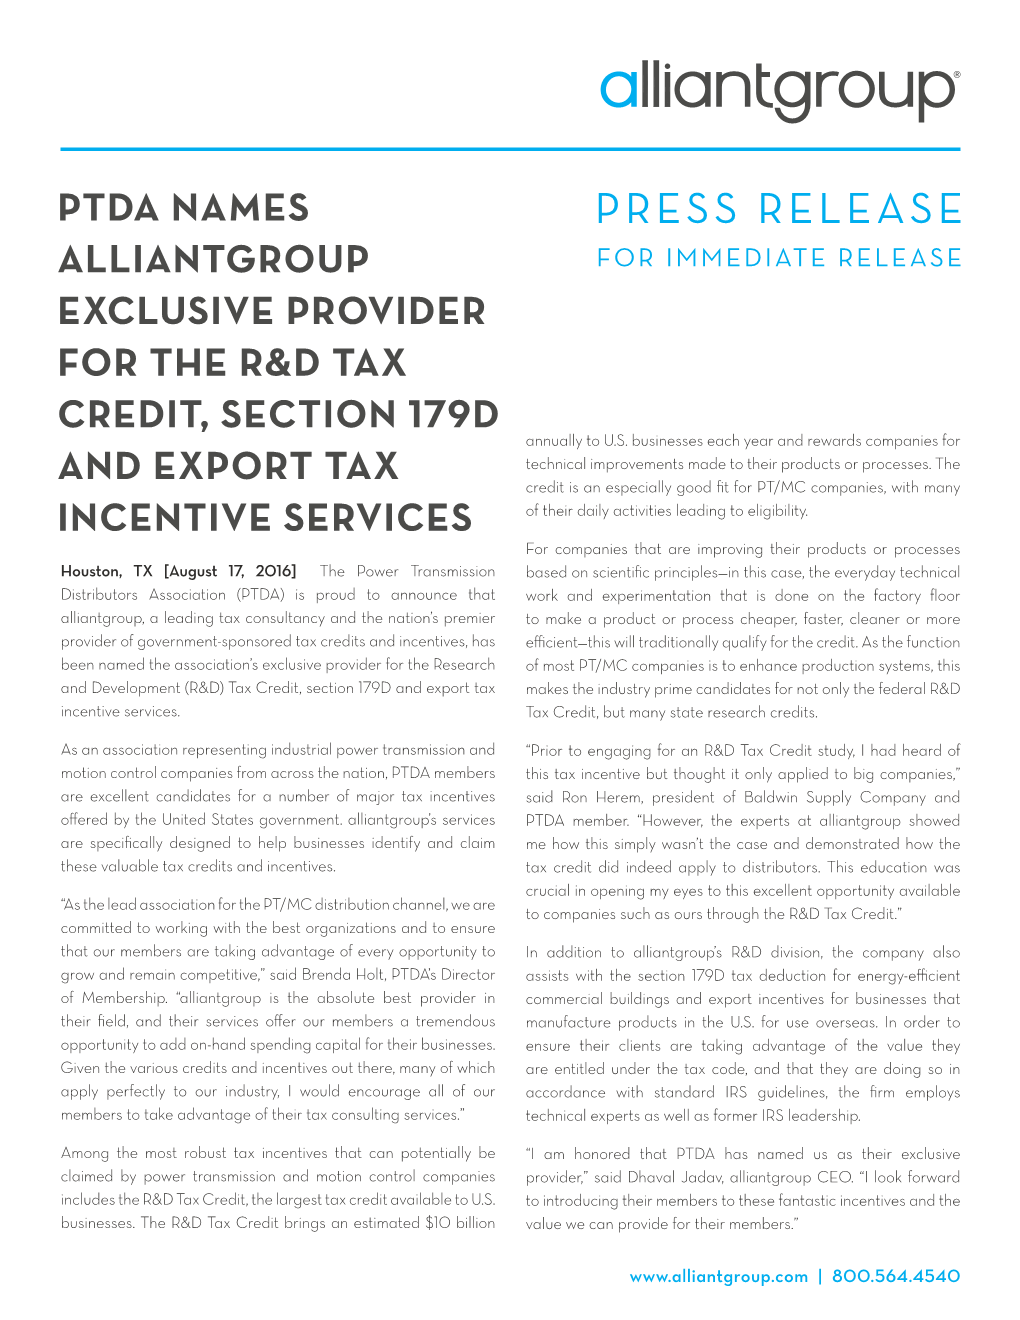 PTDA NAMES ALLIANTGROUP EXCLUSIVE PROVIDER for the R&D TAX CREDIT, SECTION 179D Annually to U.S